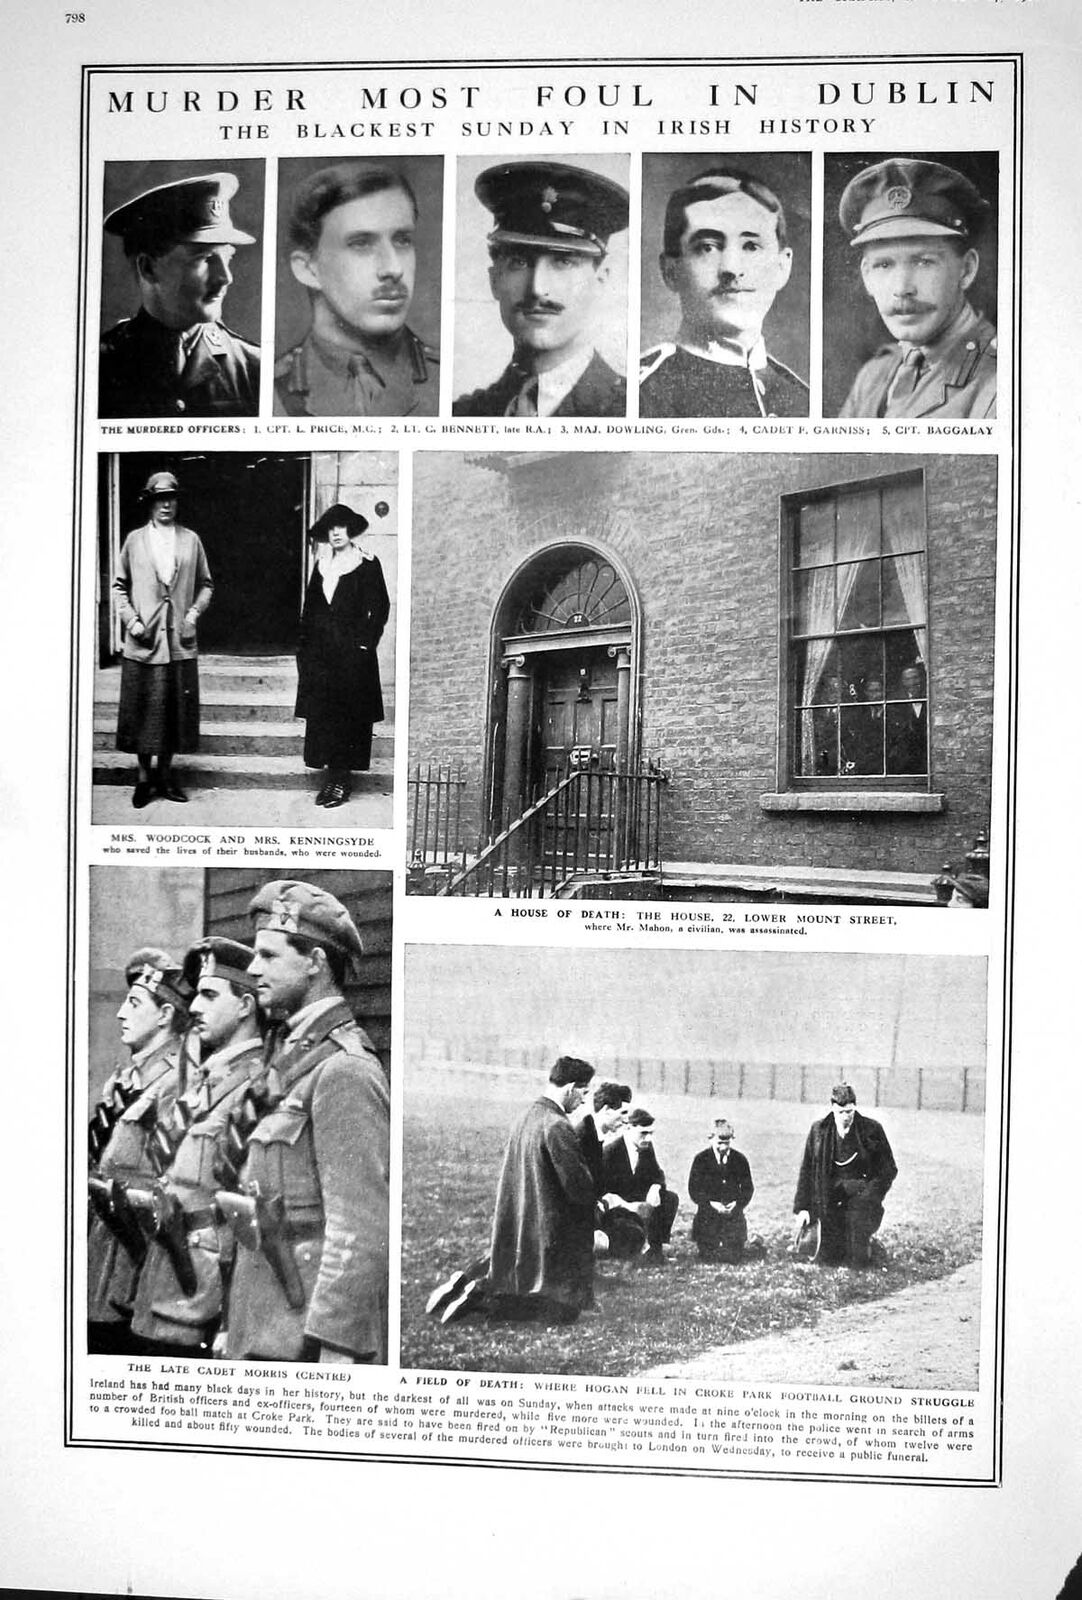 Irish War Of Independence Orgy Of Bloodshed vIn Dublin Original 1920 Page - Image 2 of 2